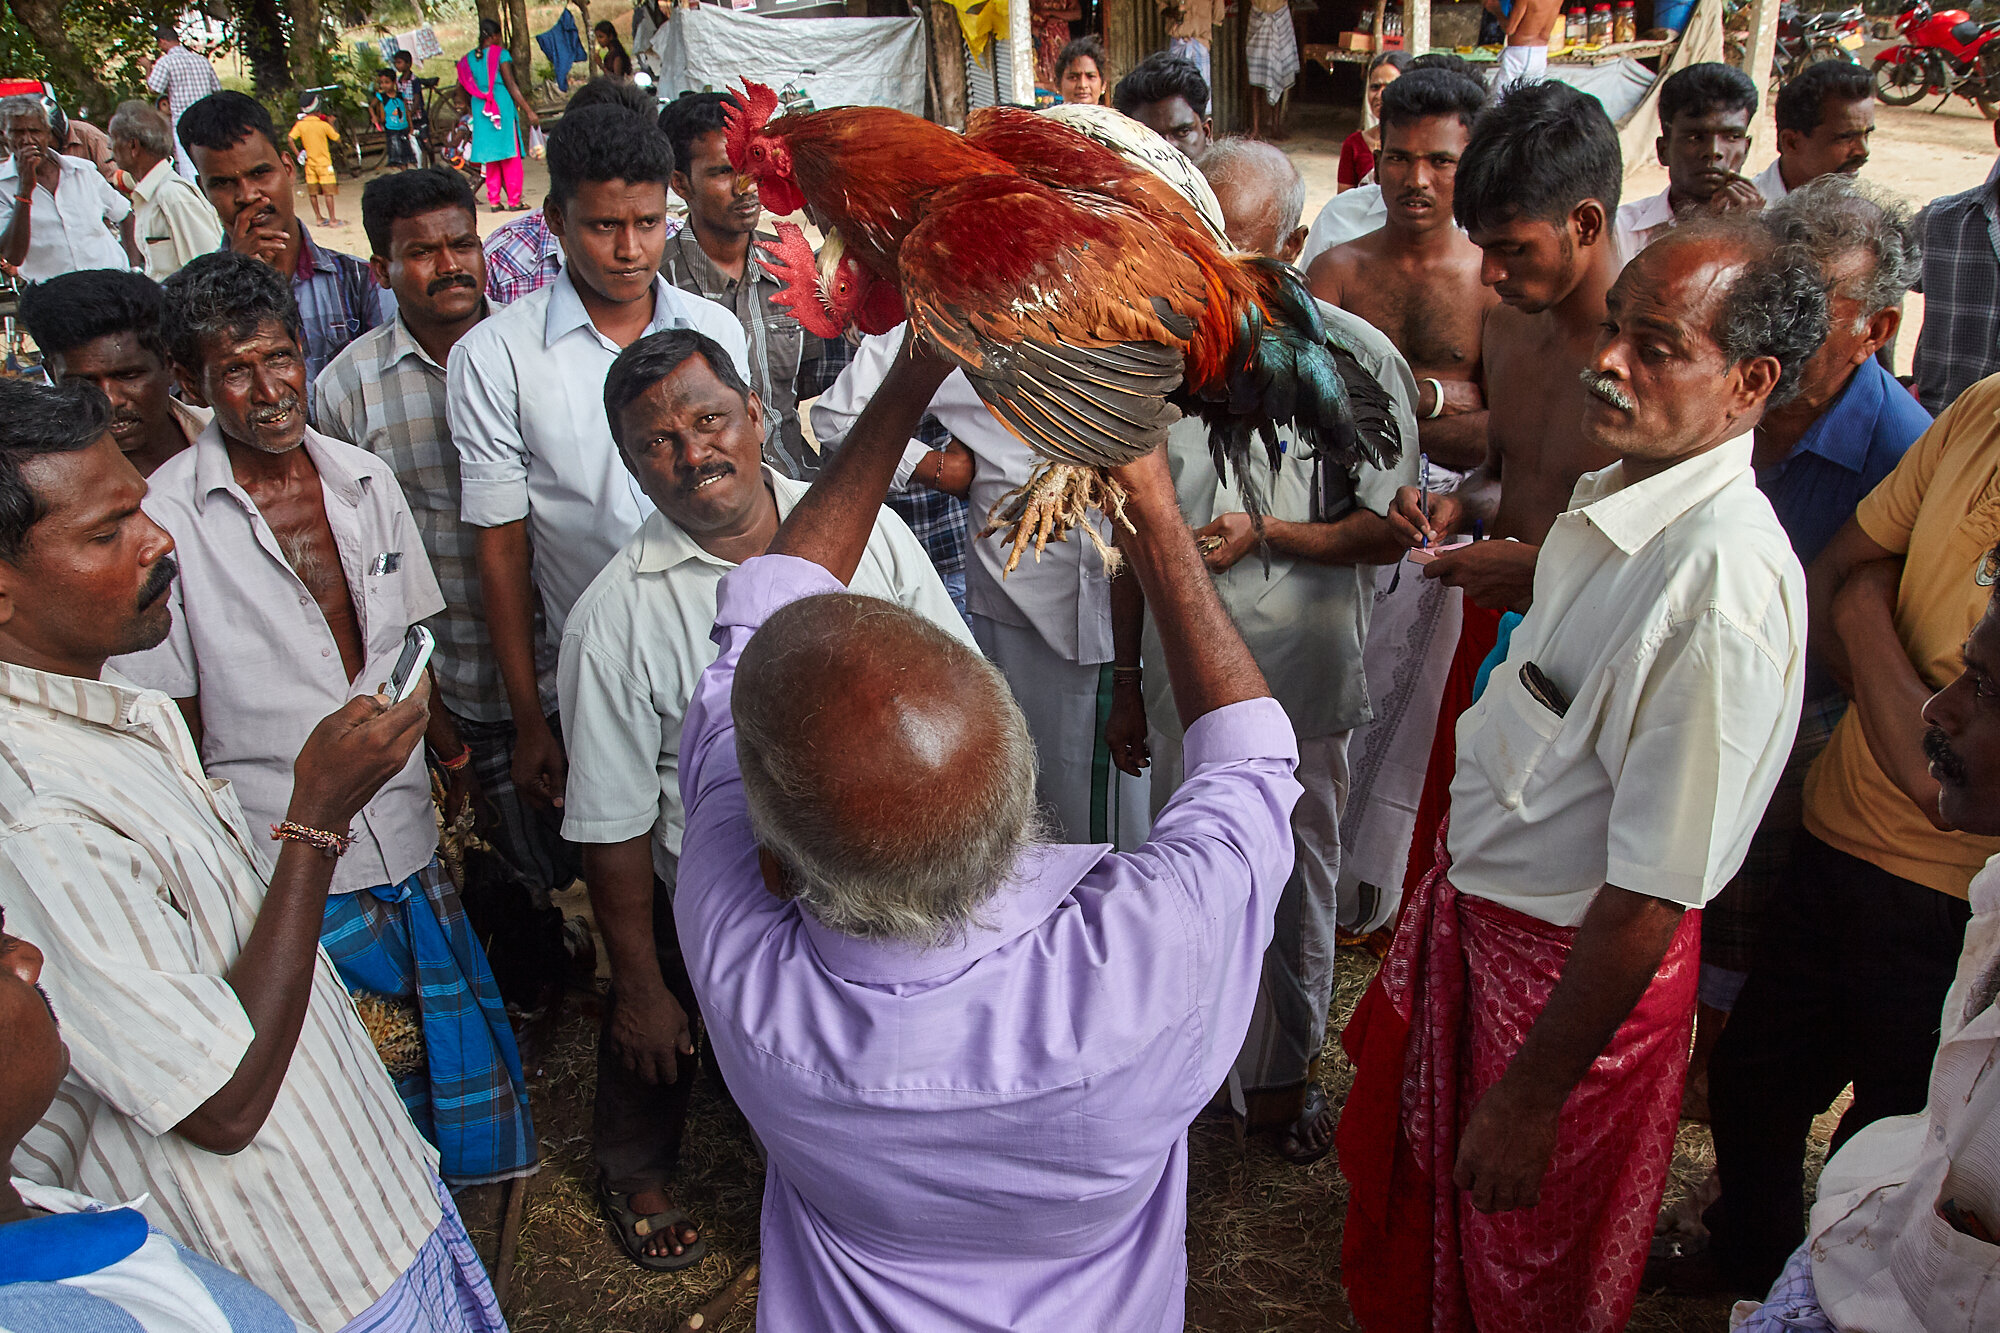  The birds collected as offerings during the journey are being sold at an auction near a village market en-route to the temple. 